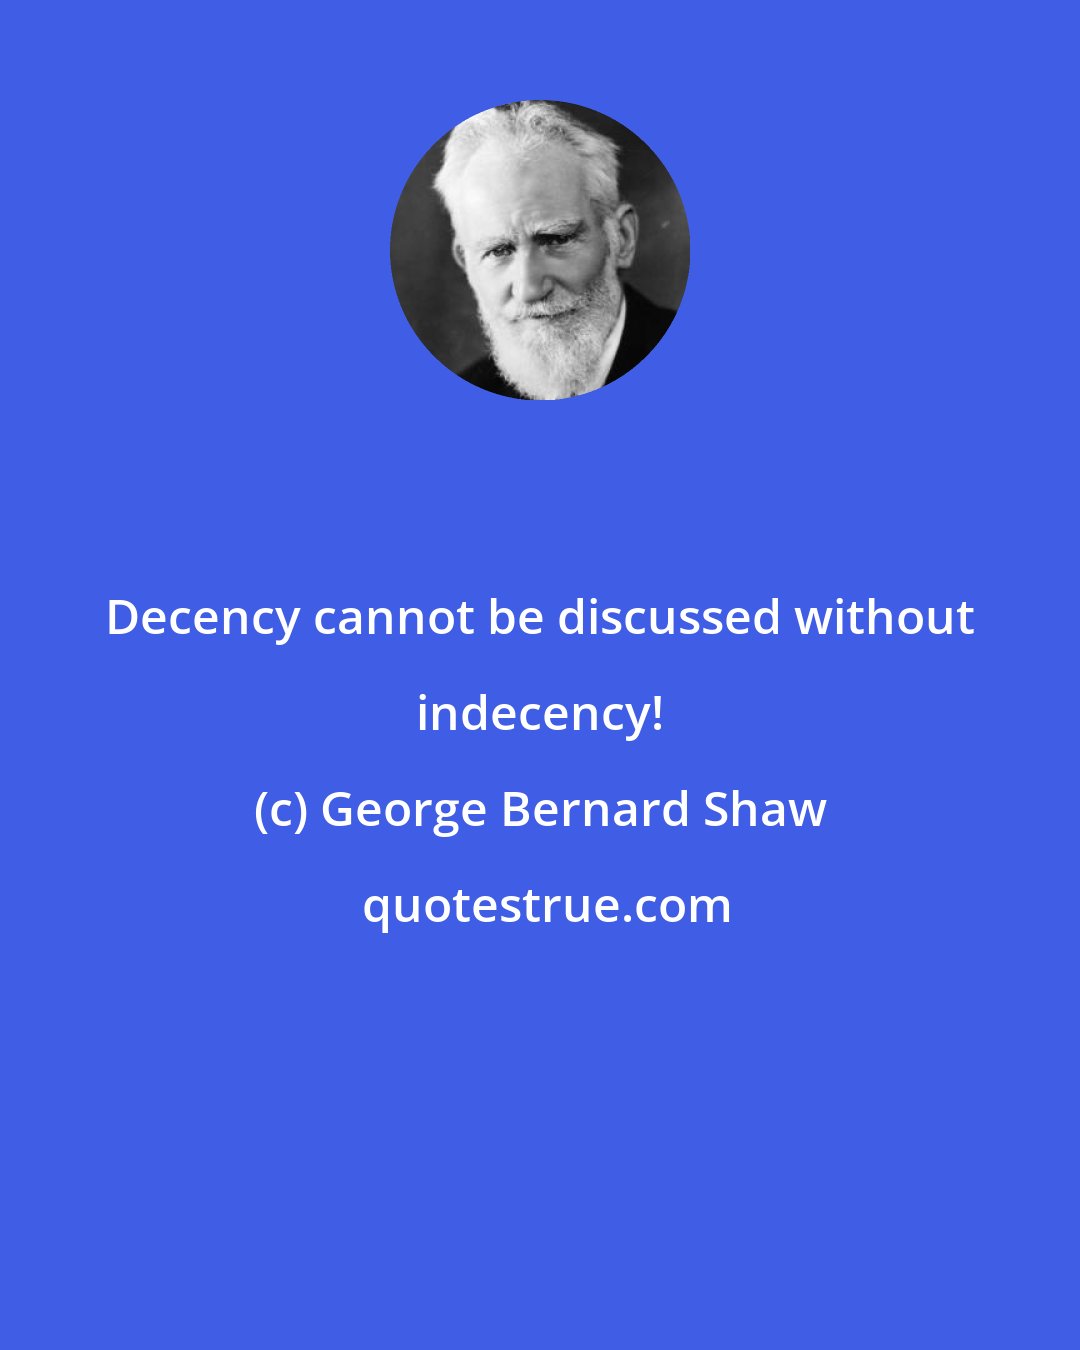 George Bernard Shaw: Decency cannot be discussed without indecency!